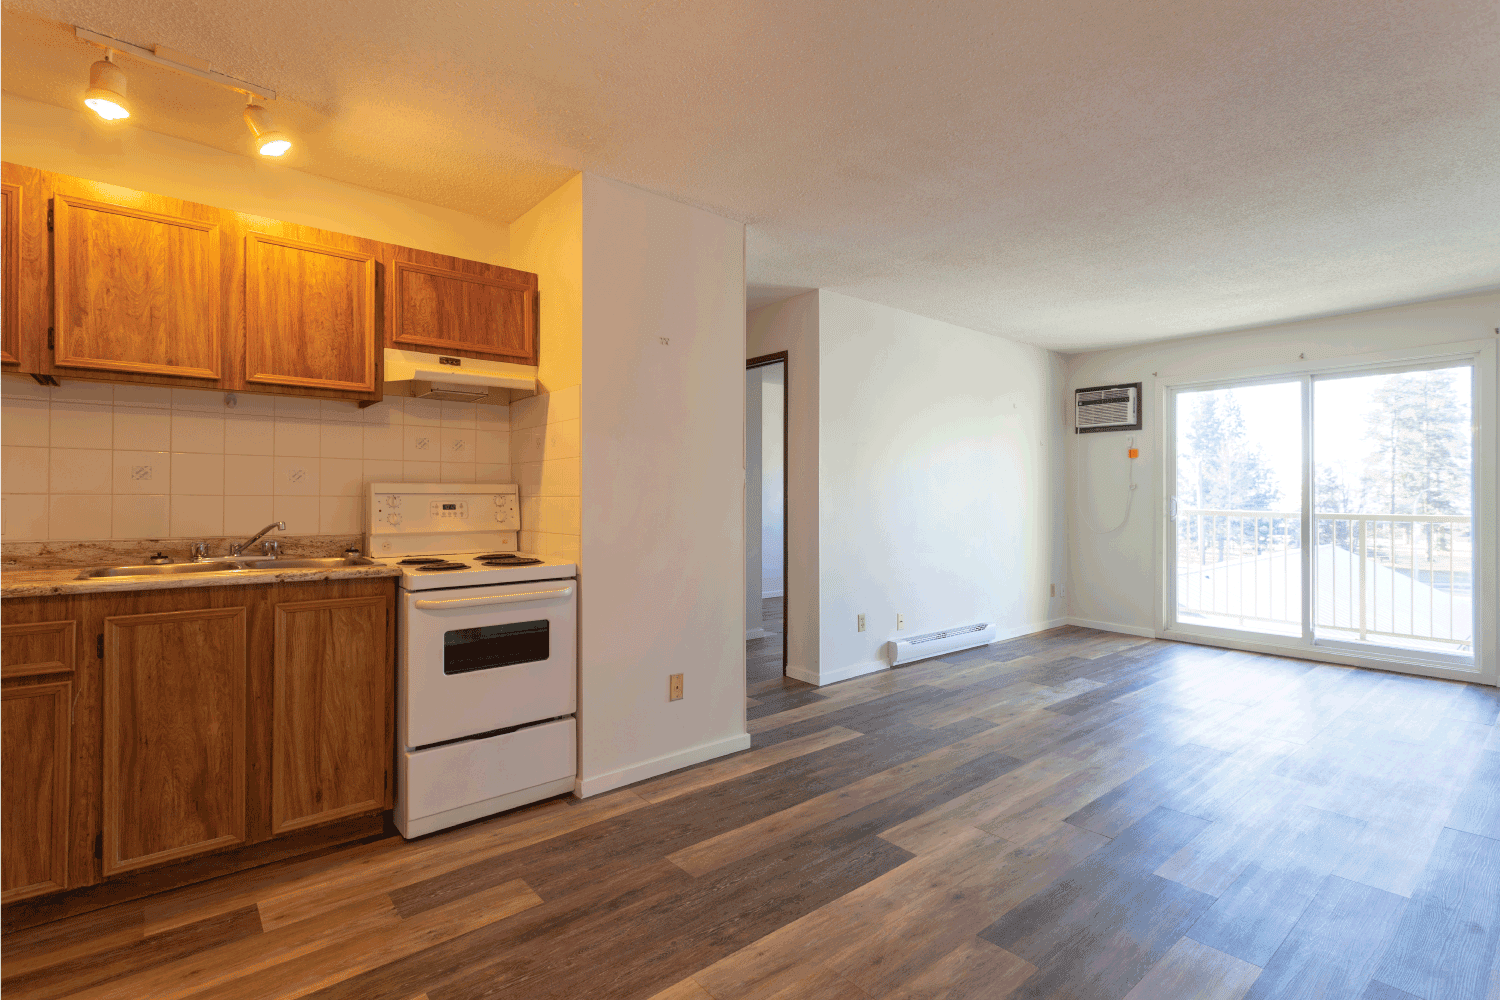 An empty vacant rental apartment property with new hardwood laminate floors and white paint on the walls with baseboard heater